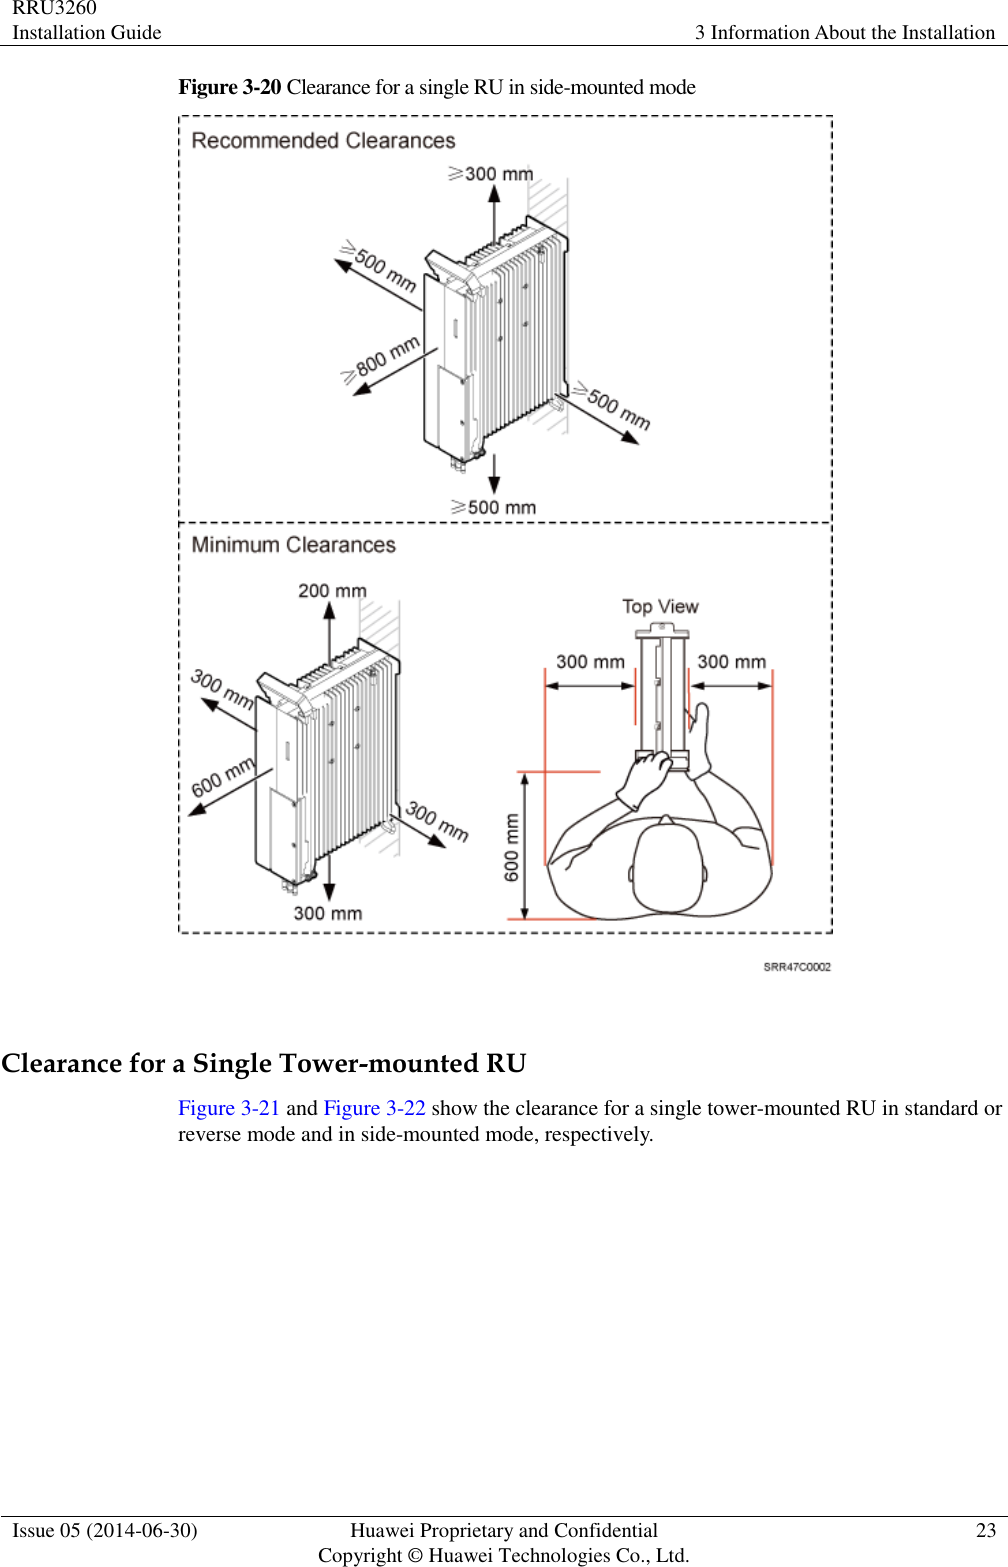 RRU3260 Installation Guide 3 Information About the Installation  Issue 05 (2014-06-30) Huawei Proprietary and Confidential                                     Copyright © Huawei Technologies Co., Ltd. 23  Figure 3-20 Clearance for a single RU in side-mounted mode   Clearance for a Single Tower-mounted RU Figure 3-21 and Figure 3-22 show the clearance for a single tower-mounted RU in standard or reverse mode and in side-mounted mode, respectively. 